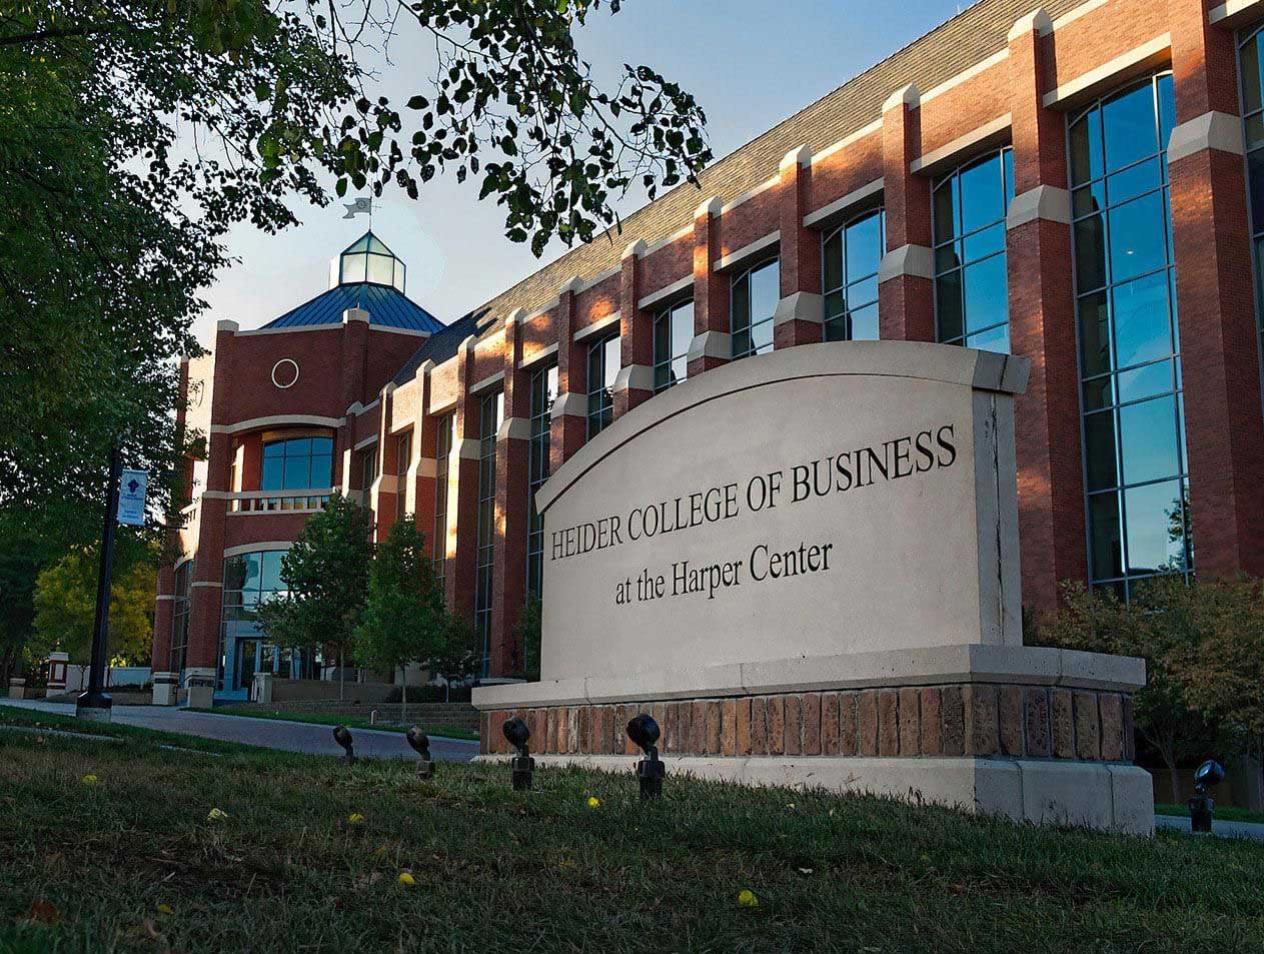 The concrete Heider College of Business sign with Harper Center in the background